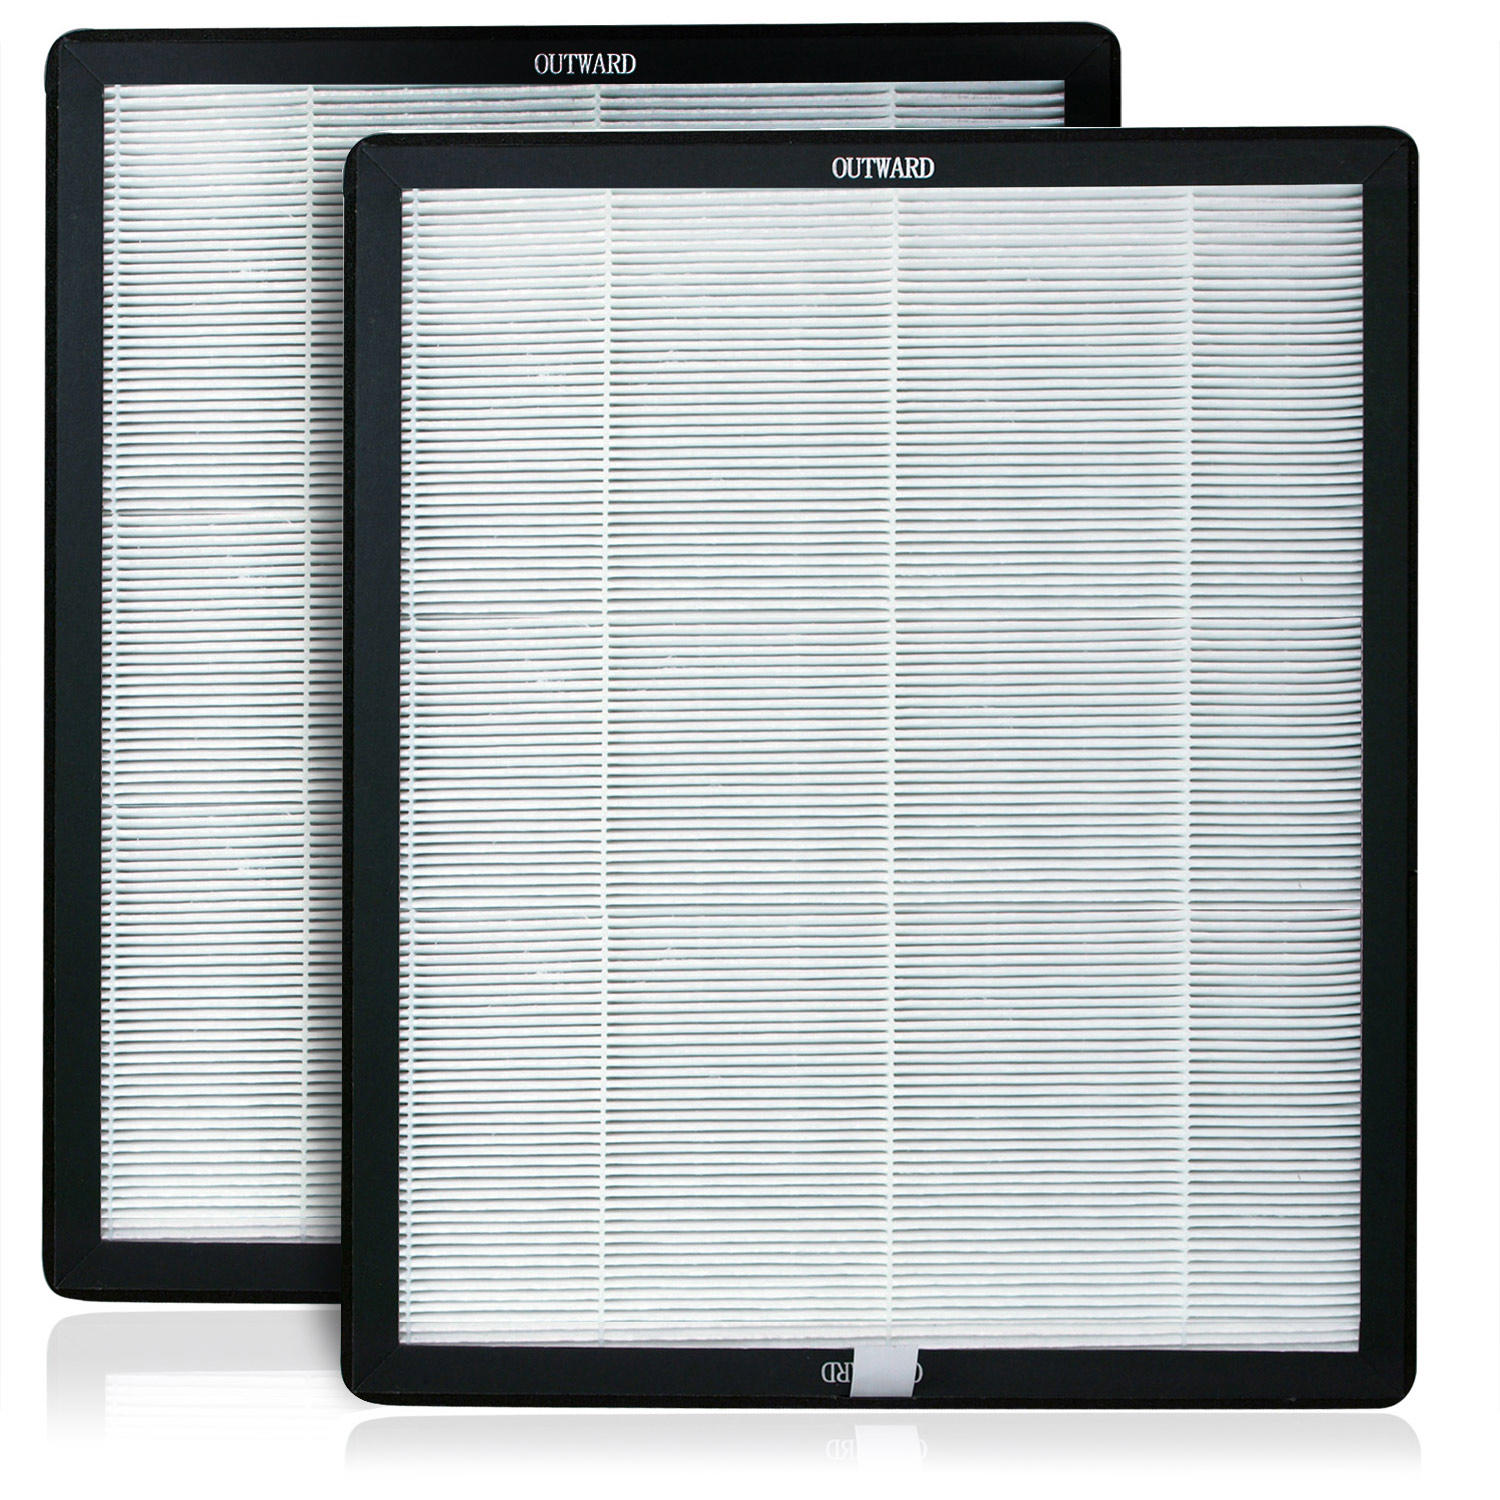 Advanced Pure Air Newport '9000' model Replacement HEPA/CARBON Filter (TWIN PACK)